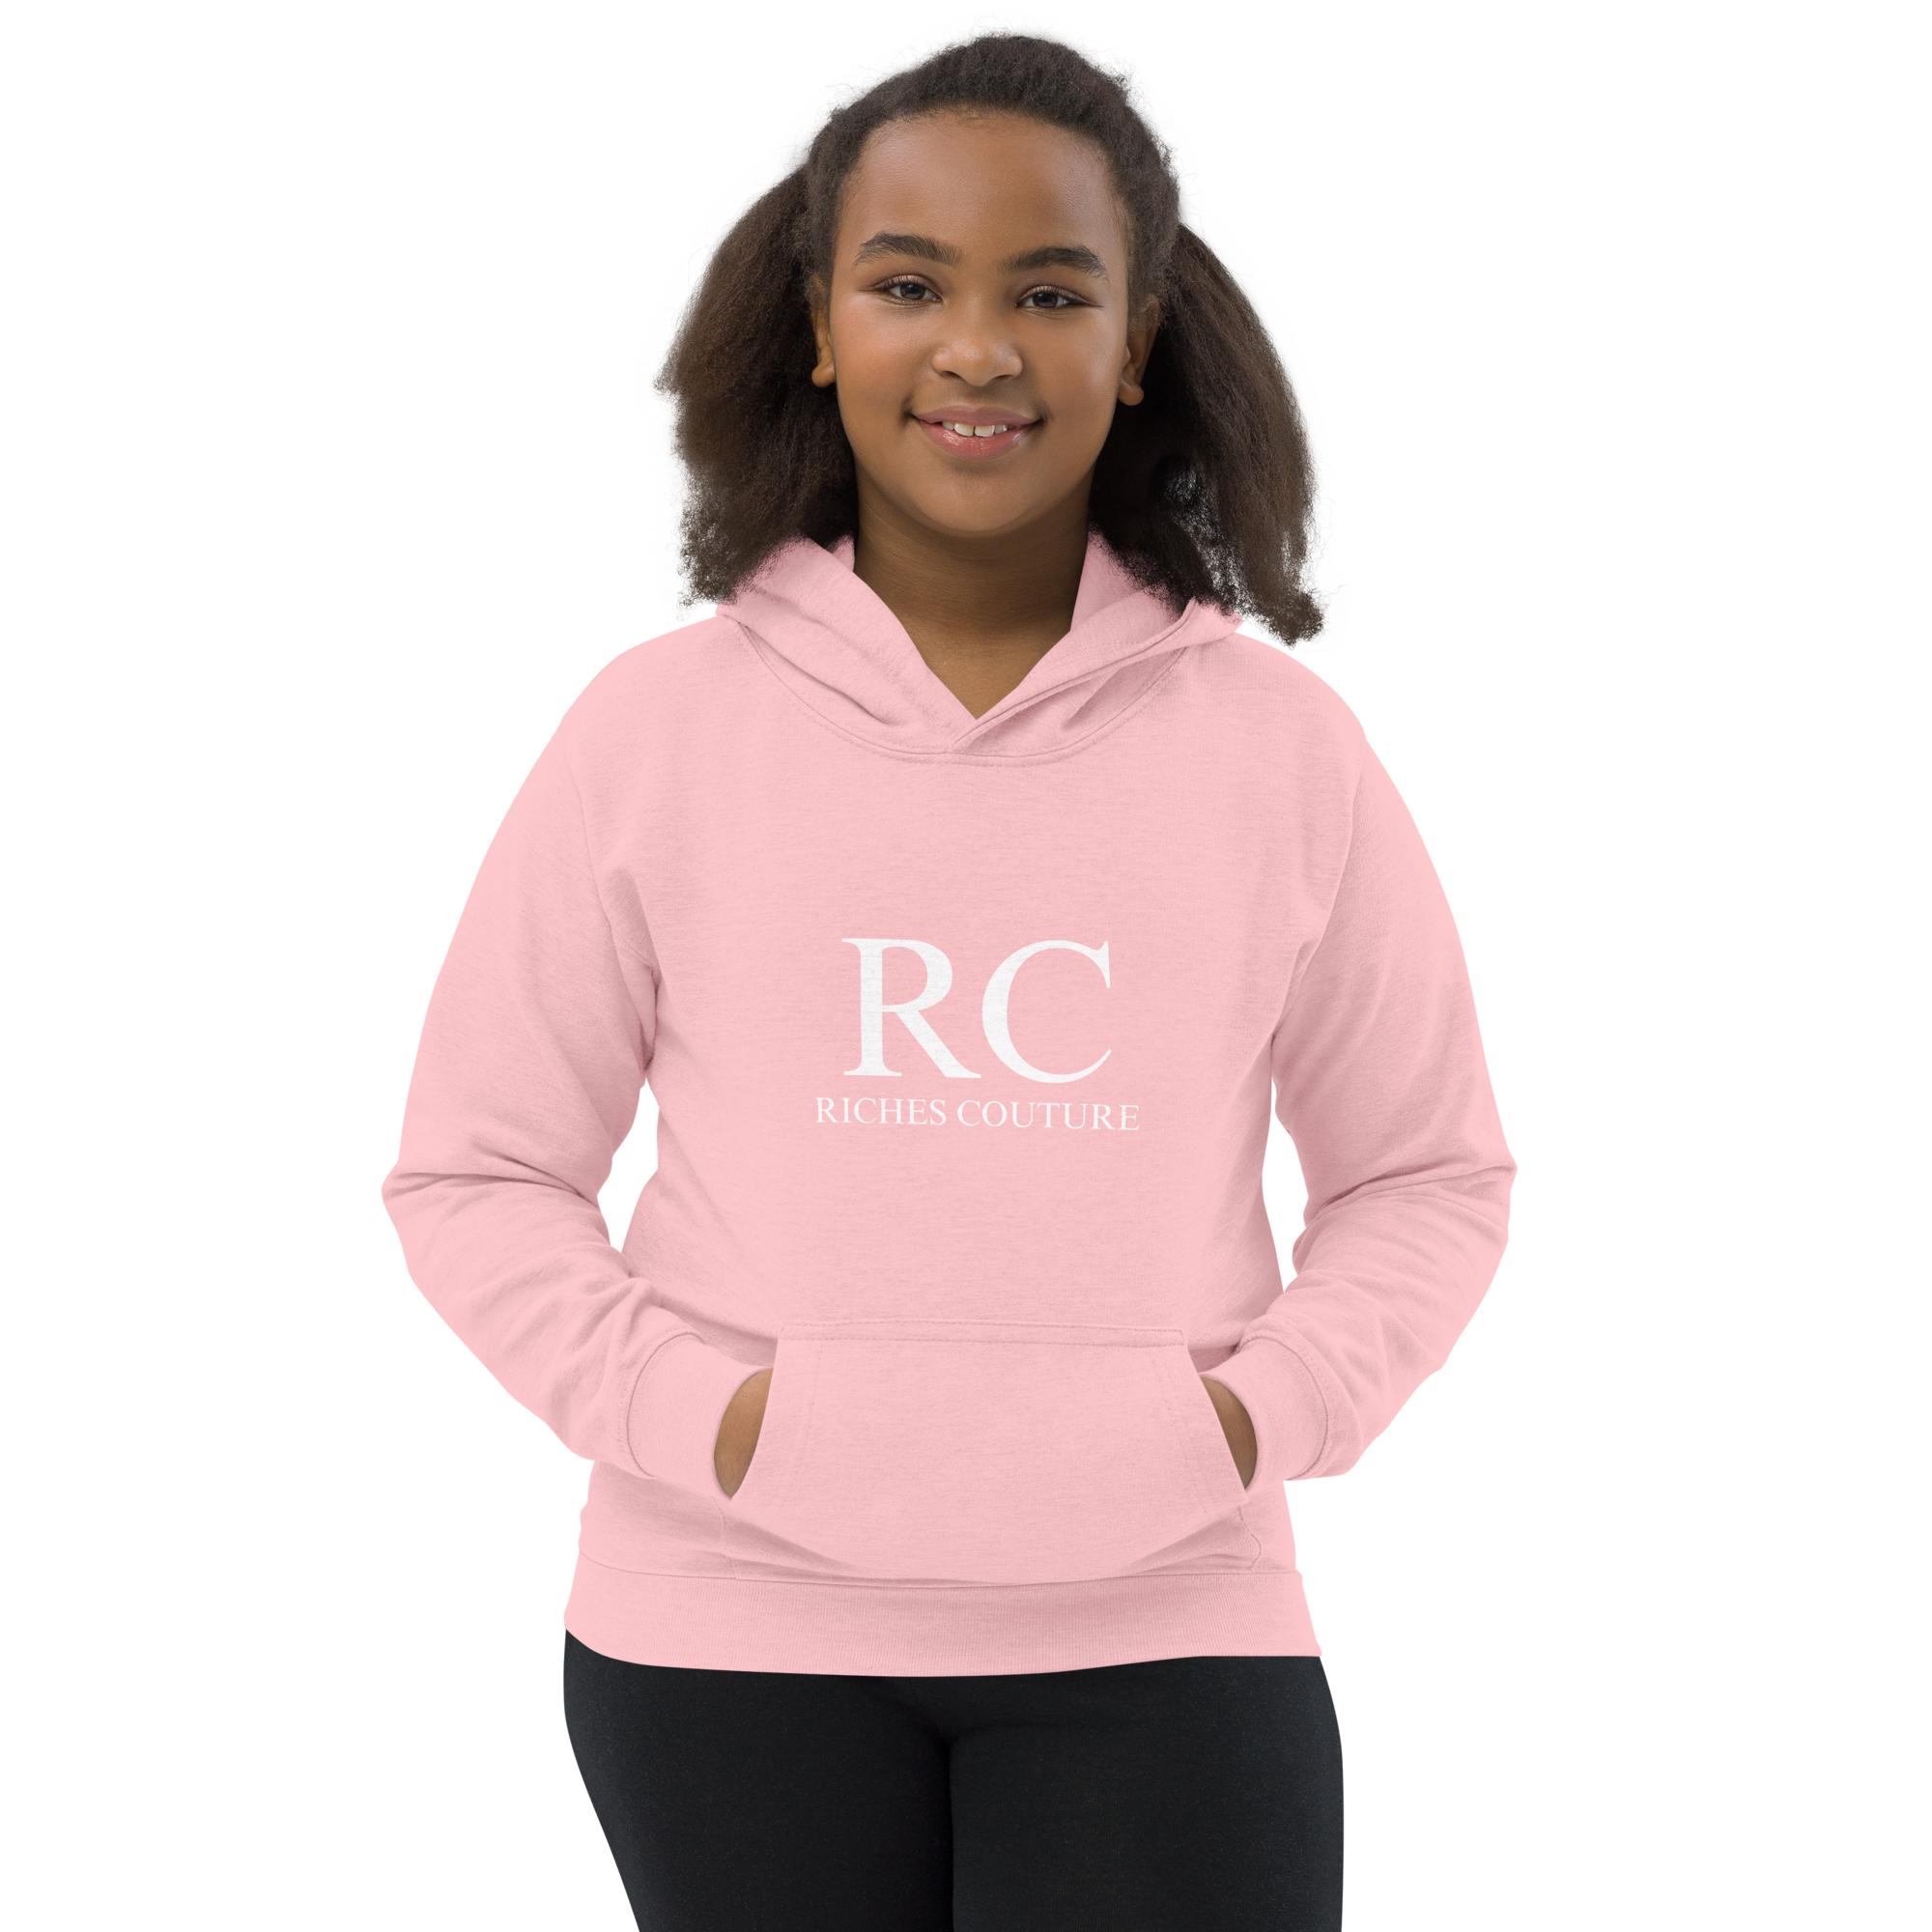 Riches Couture Girls Comfort kids’ hoodie in light pink.